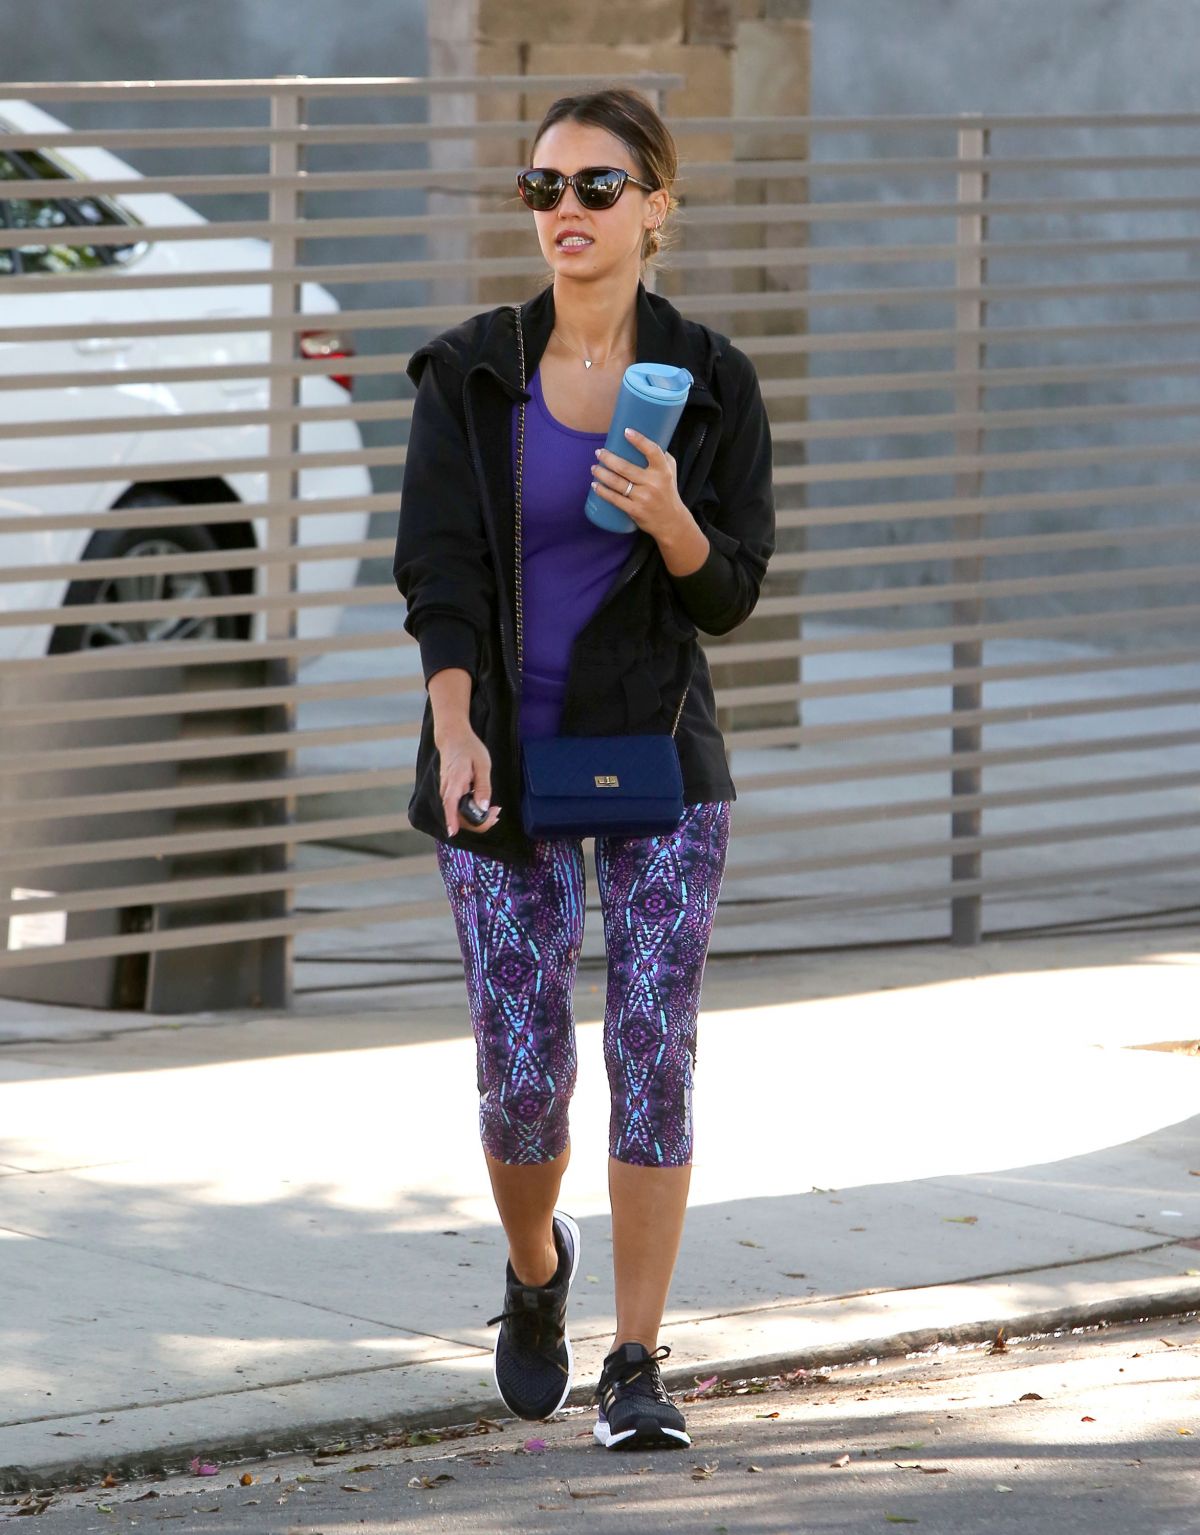 JESSICA ALBA in Leggings at a Gym in West Hollywood 07/13/2015 – HawtCelebs